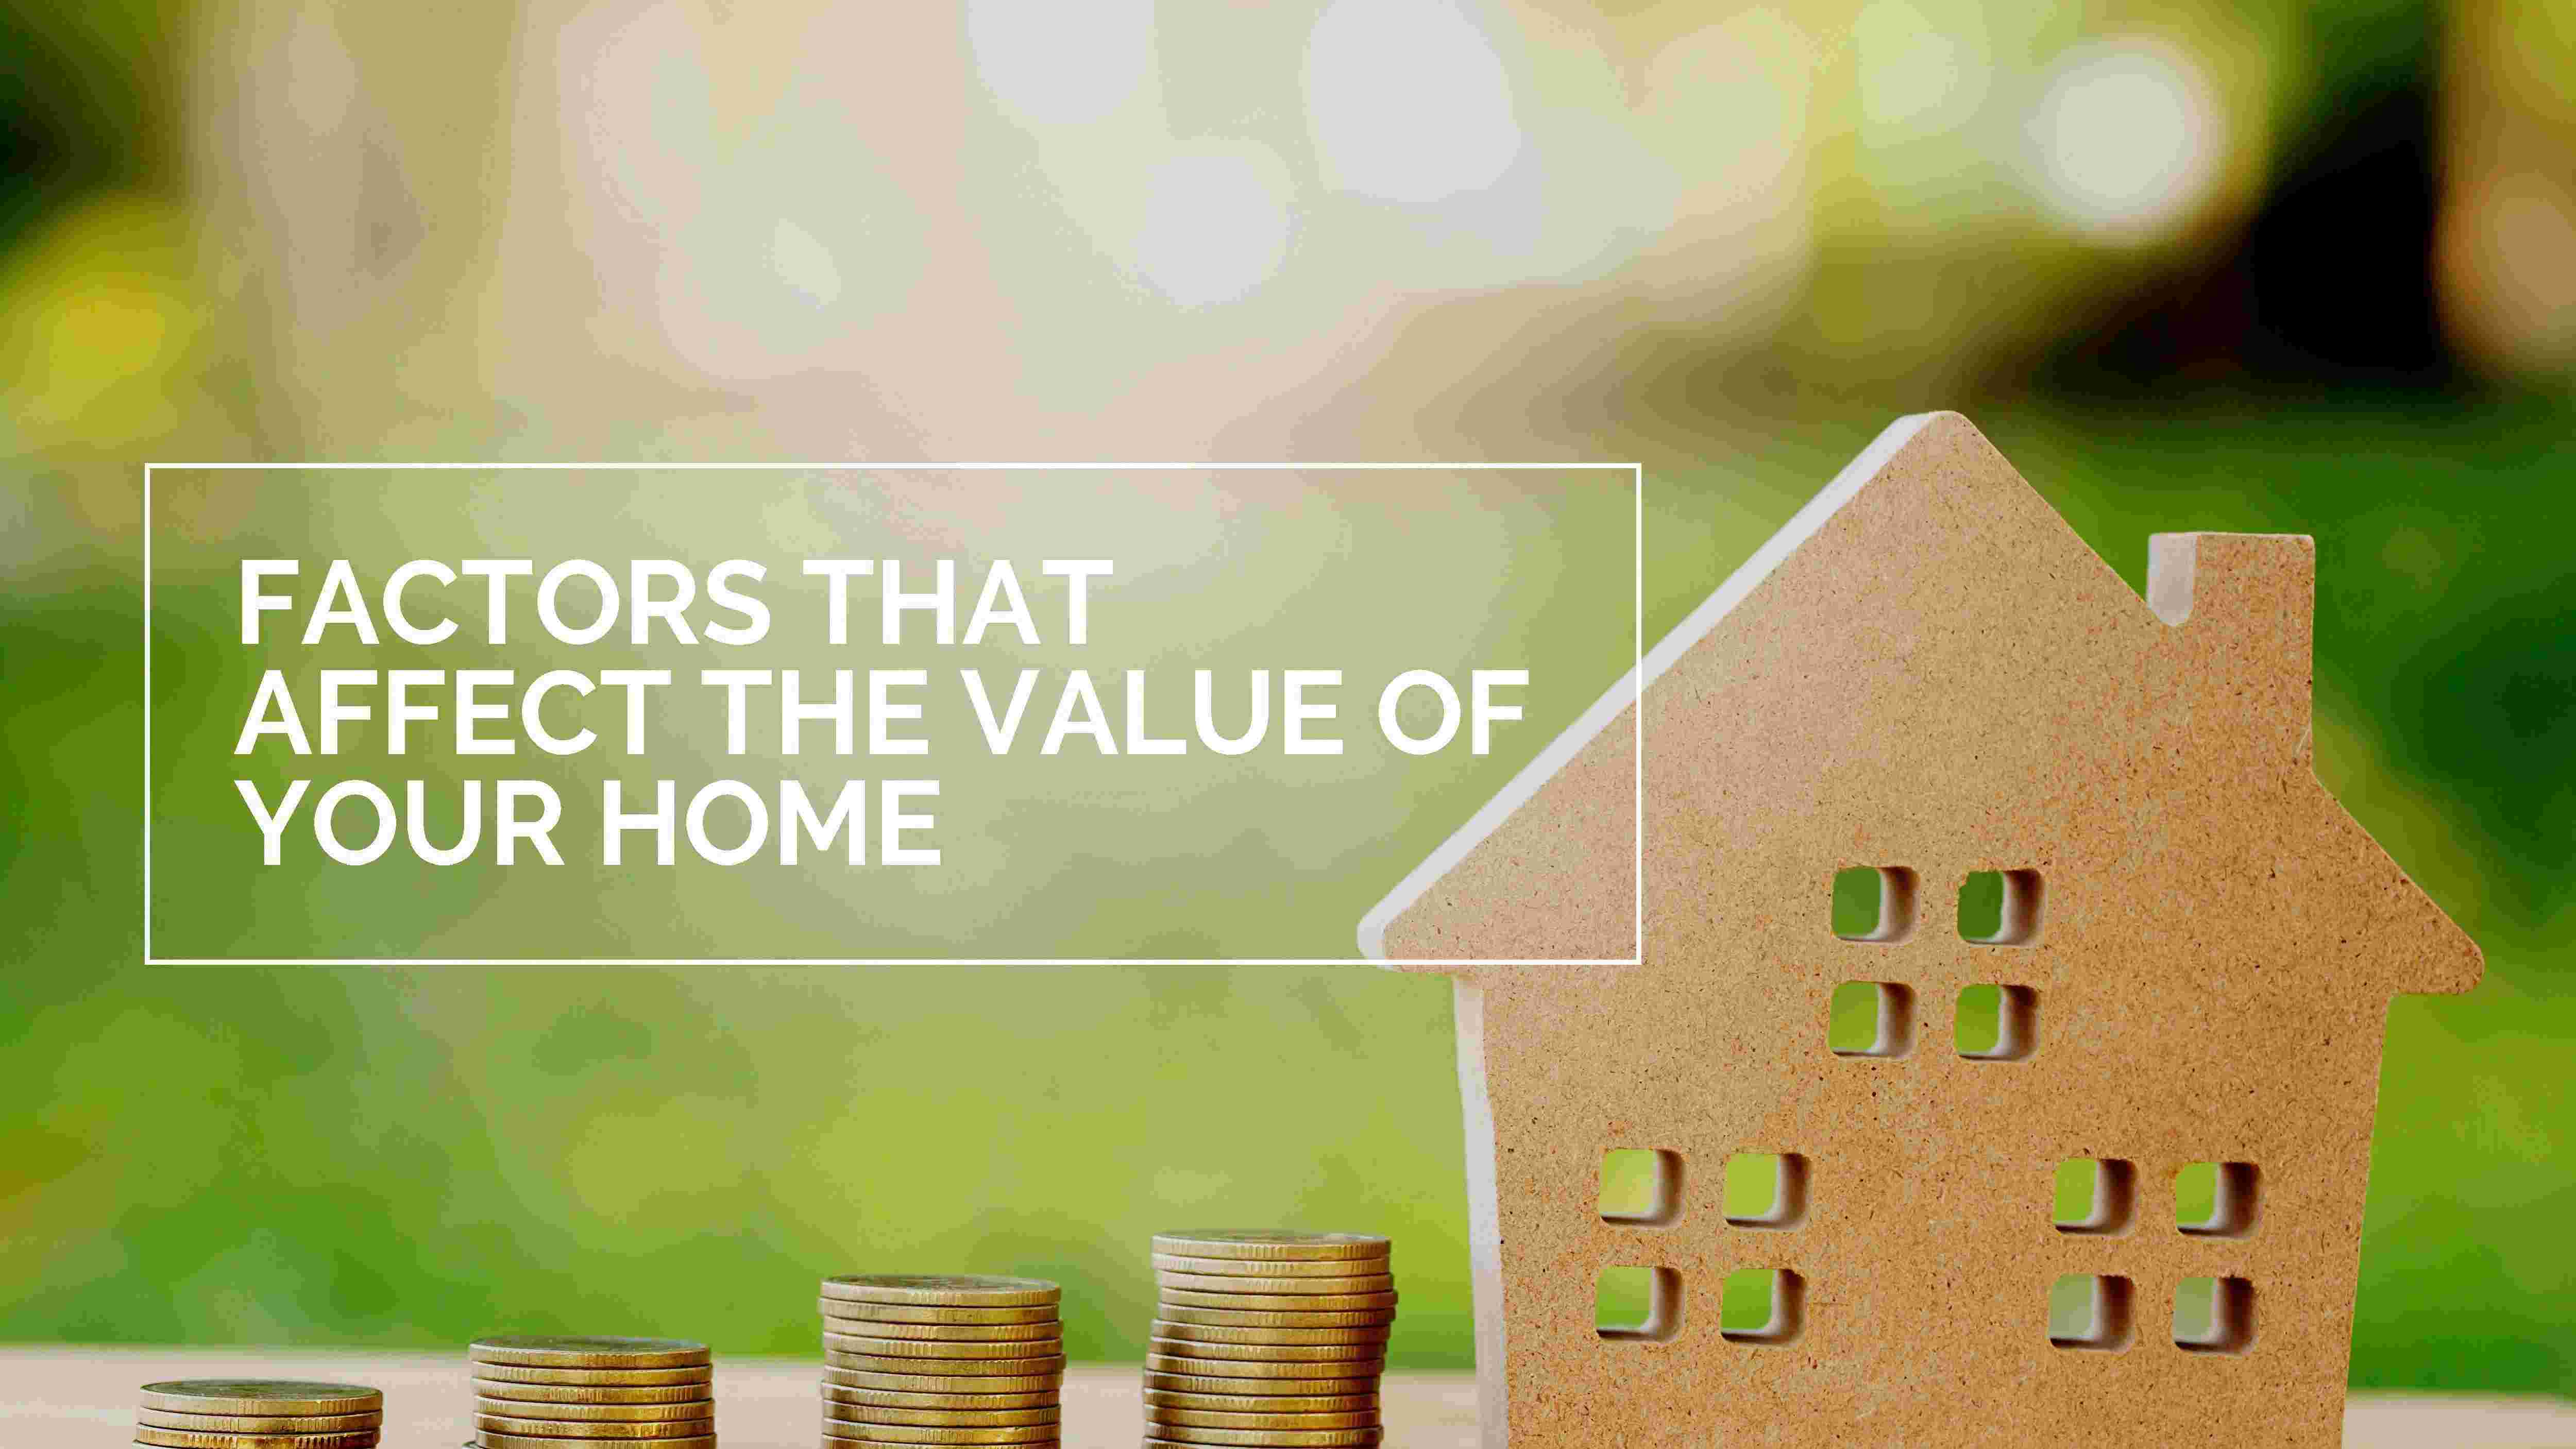 What factors impact your home's value?